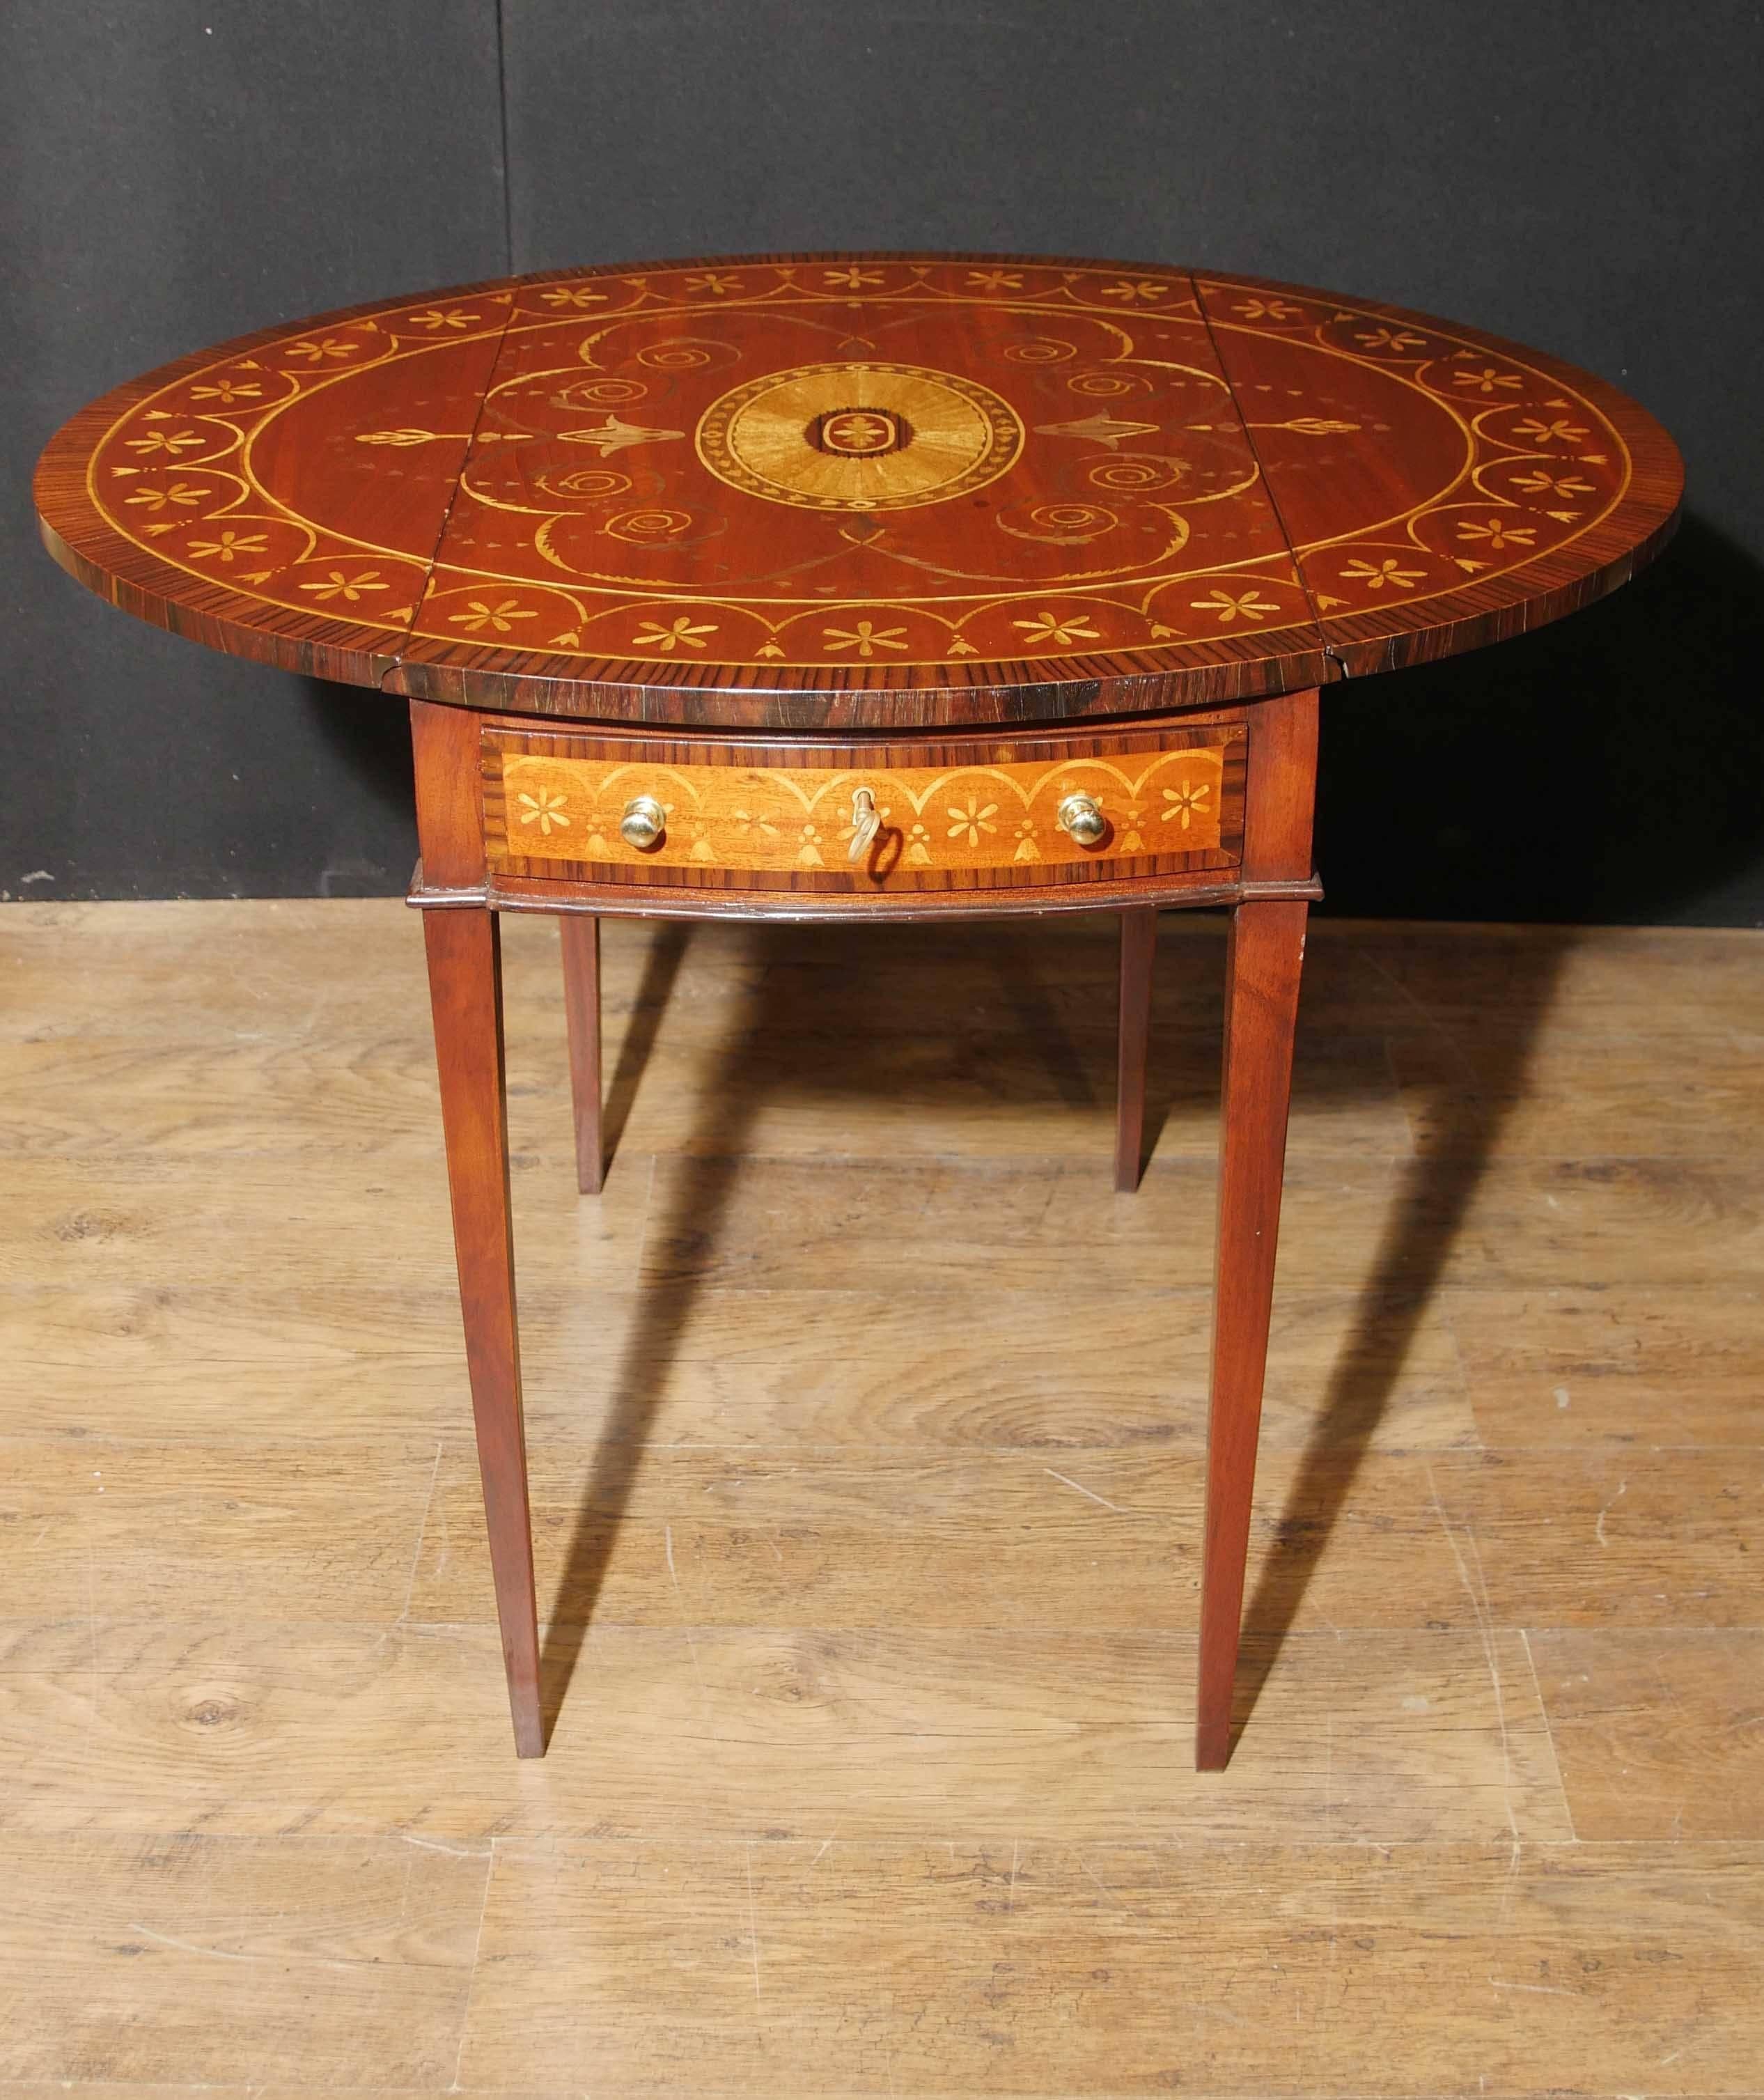 Sheratonl Style Mahogany Pembroke Table Drop Leaf Tables Marquetry Inlay For Sale 2